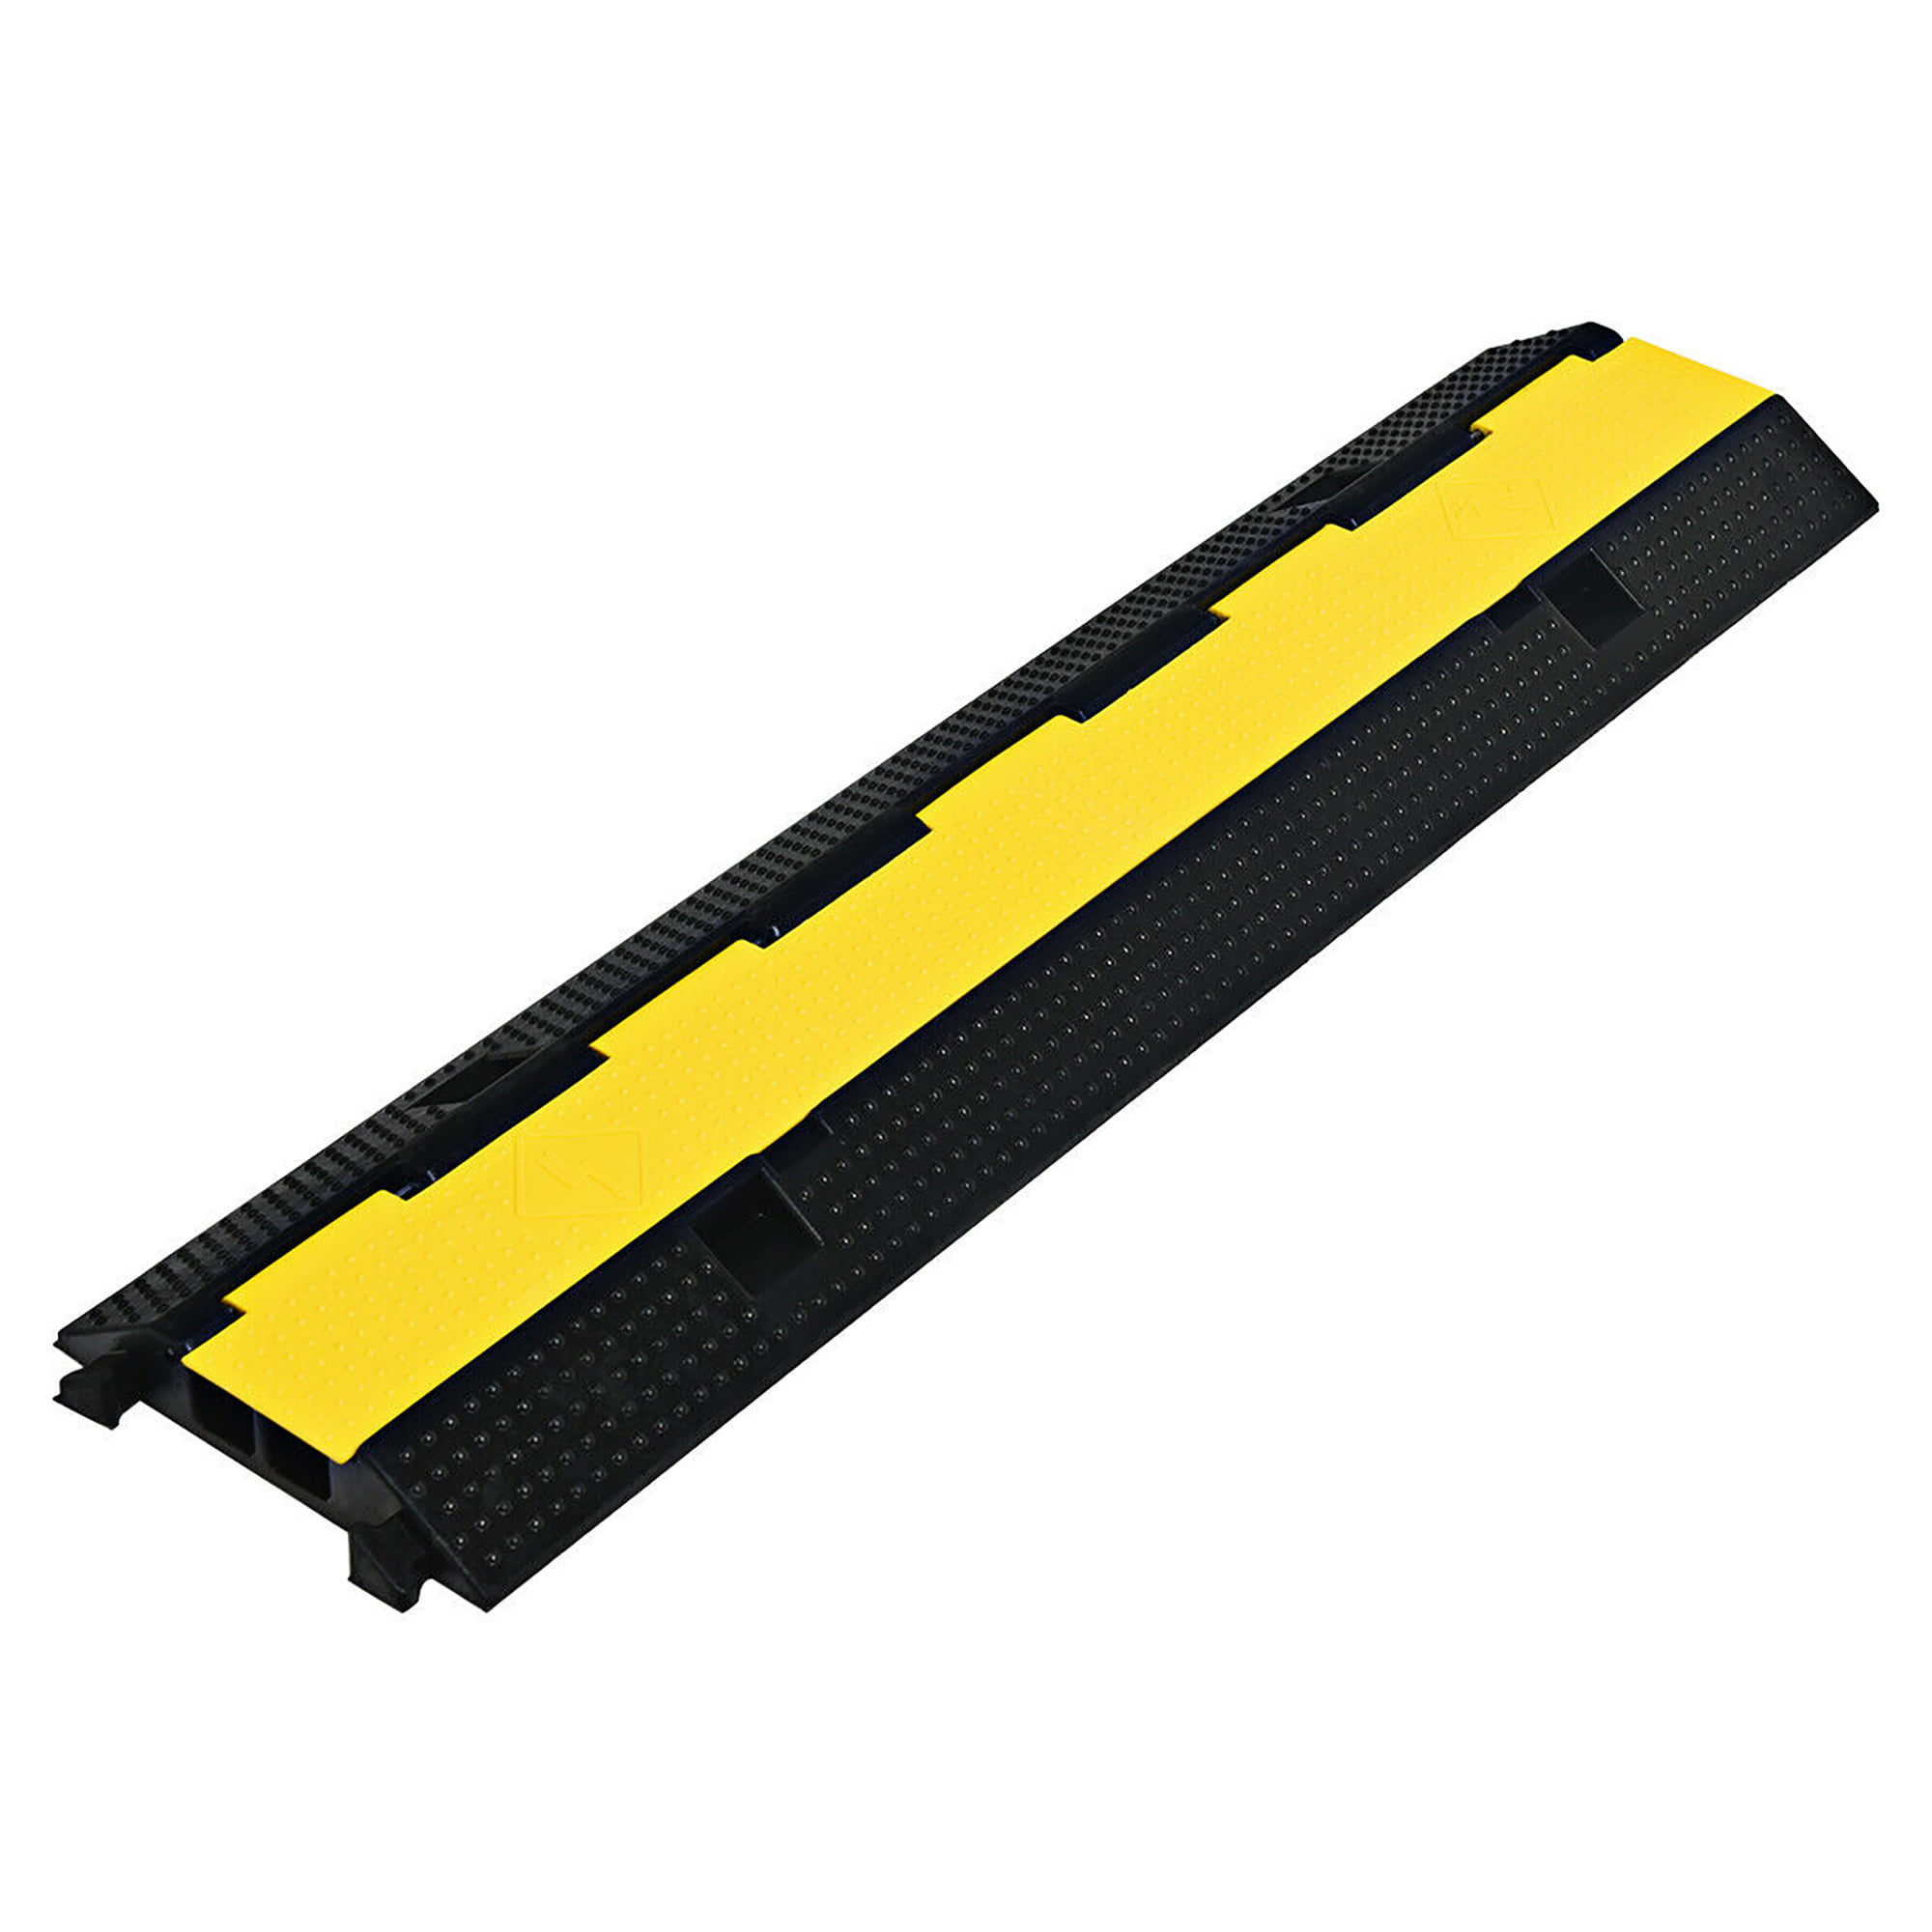 Costway 2 Channel Rubber Floor Cable Protectors Traffic Speed Bump w ...